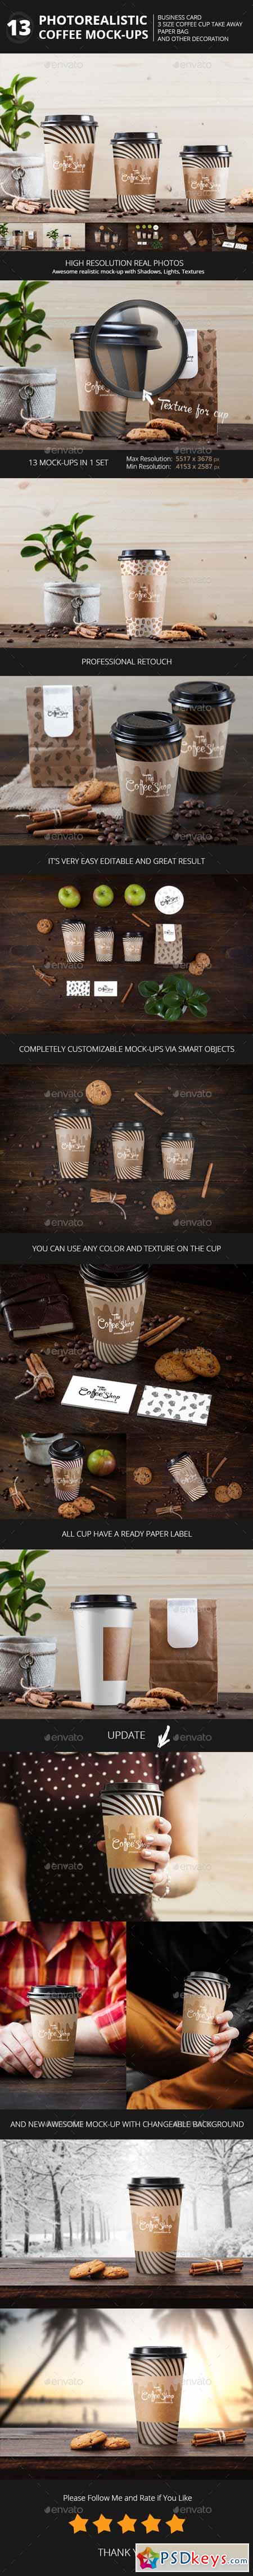 Coffee Collection Branding Mock-Up's 10713731